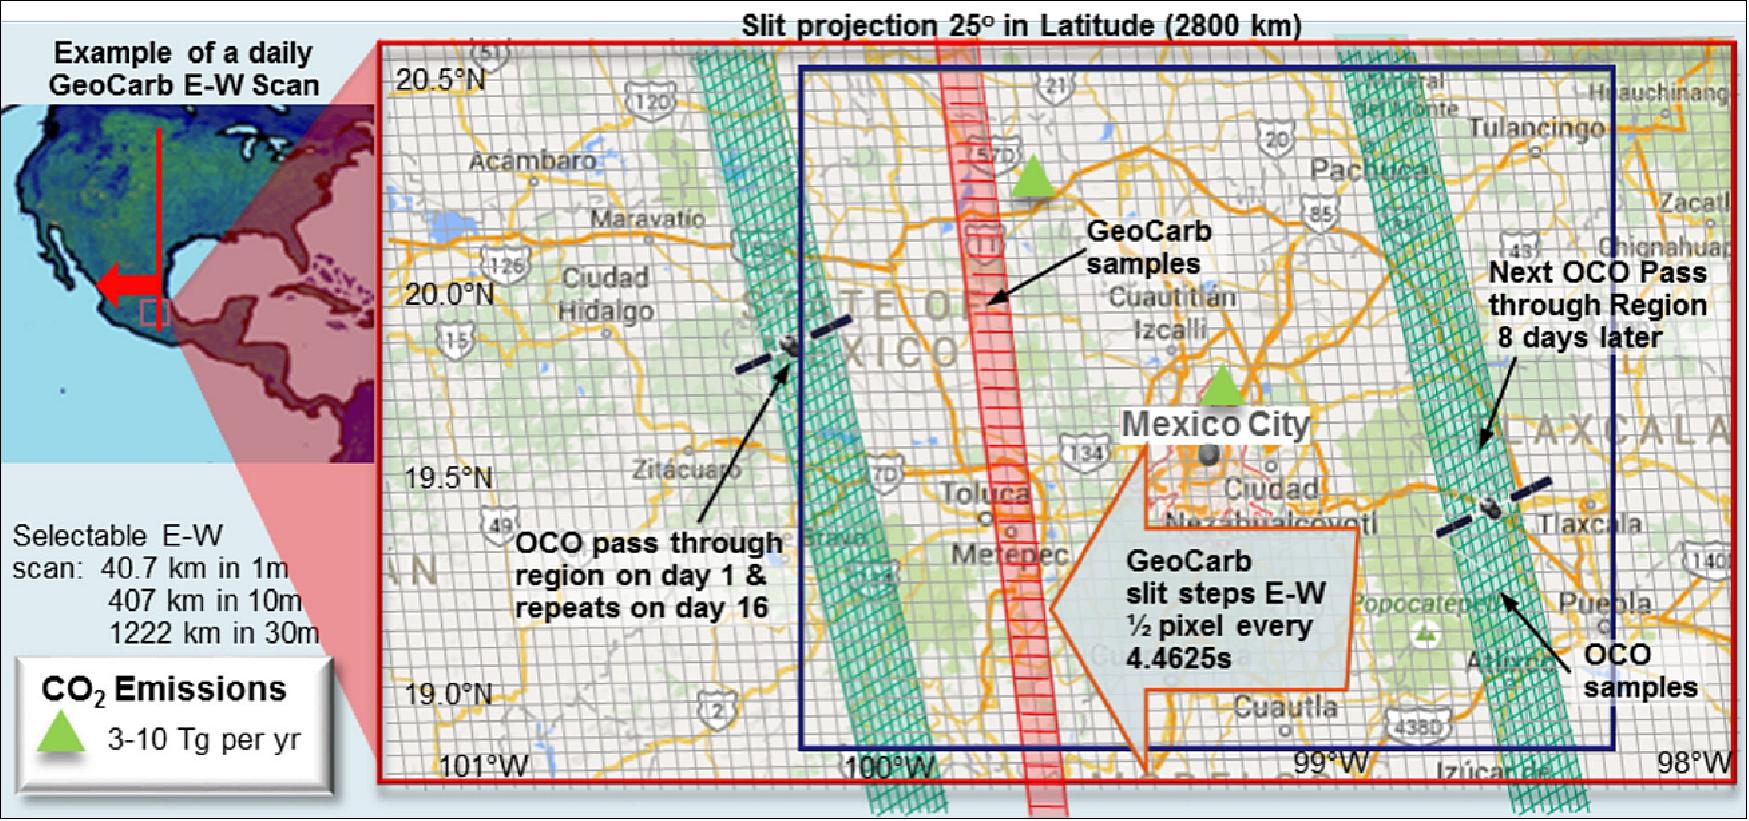 Figure 7: Sample field of view for the area surrounding Mexico City. The green parallelograms represent individual OCO-2 soundings, and each track is traversed in a few minutes, but with a 16 day latency between revisits. By comparison, the red rectangles represent individual GeoCarb soundings, and the shaded region depicts a single observing slit projection. Every 4.4625s, the shaded red area will shift a half width to the left, allowing the area to be scanned in full in a few minutes. The map of North America in the upper left shows the full N/S extent of the slit projection. The green triangles represent power plants that produce 3–10 TgC (Teragram of carbon) per year in emissions. GeoCarb would make it possible to verify the reported emissions rates with top down emissions estimates (image credit: GeoCarb Team)